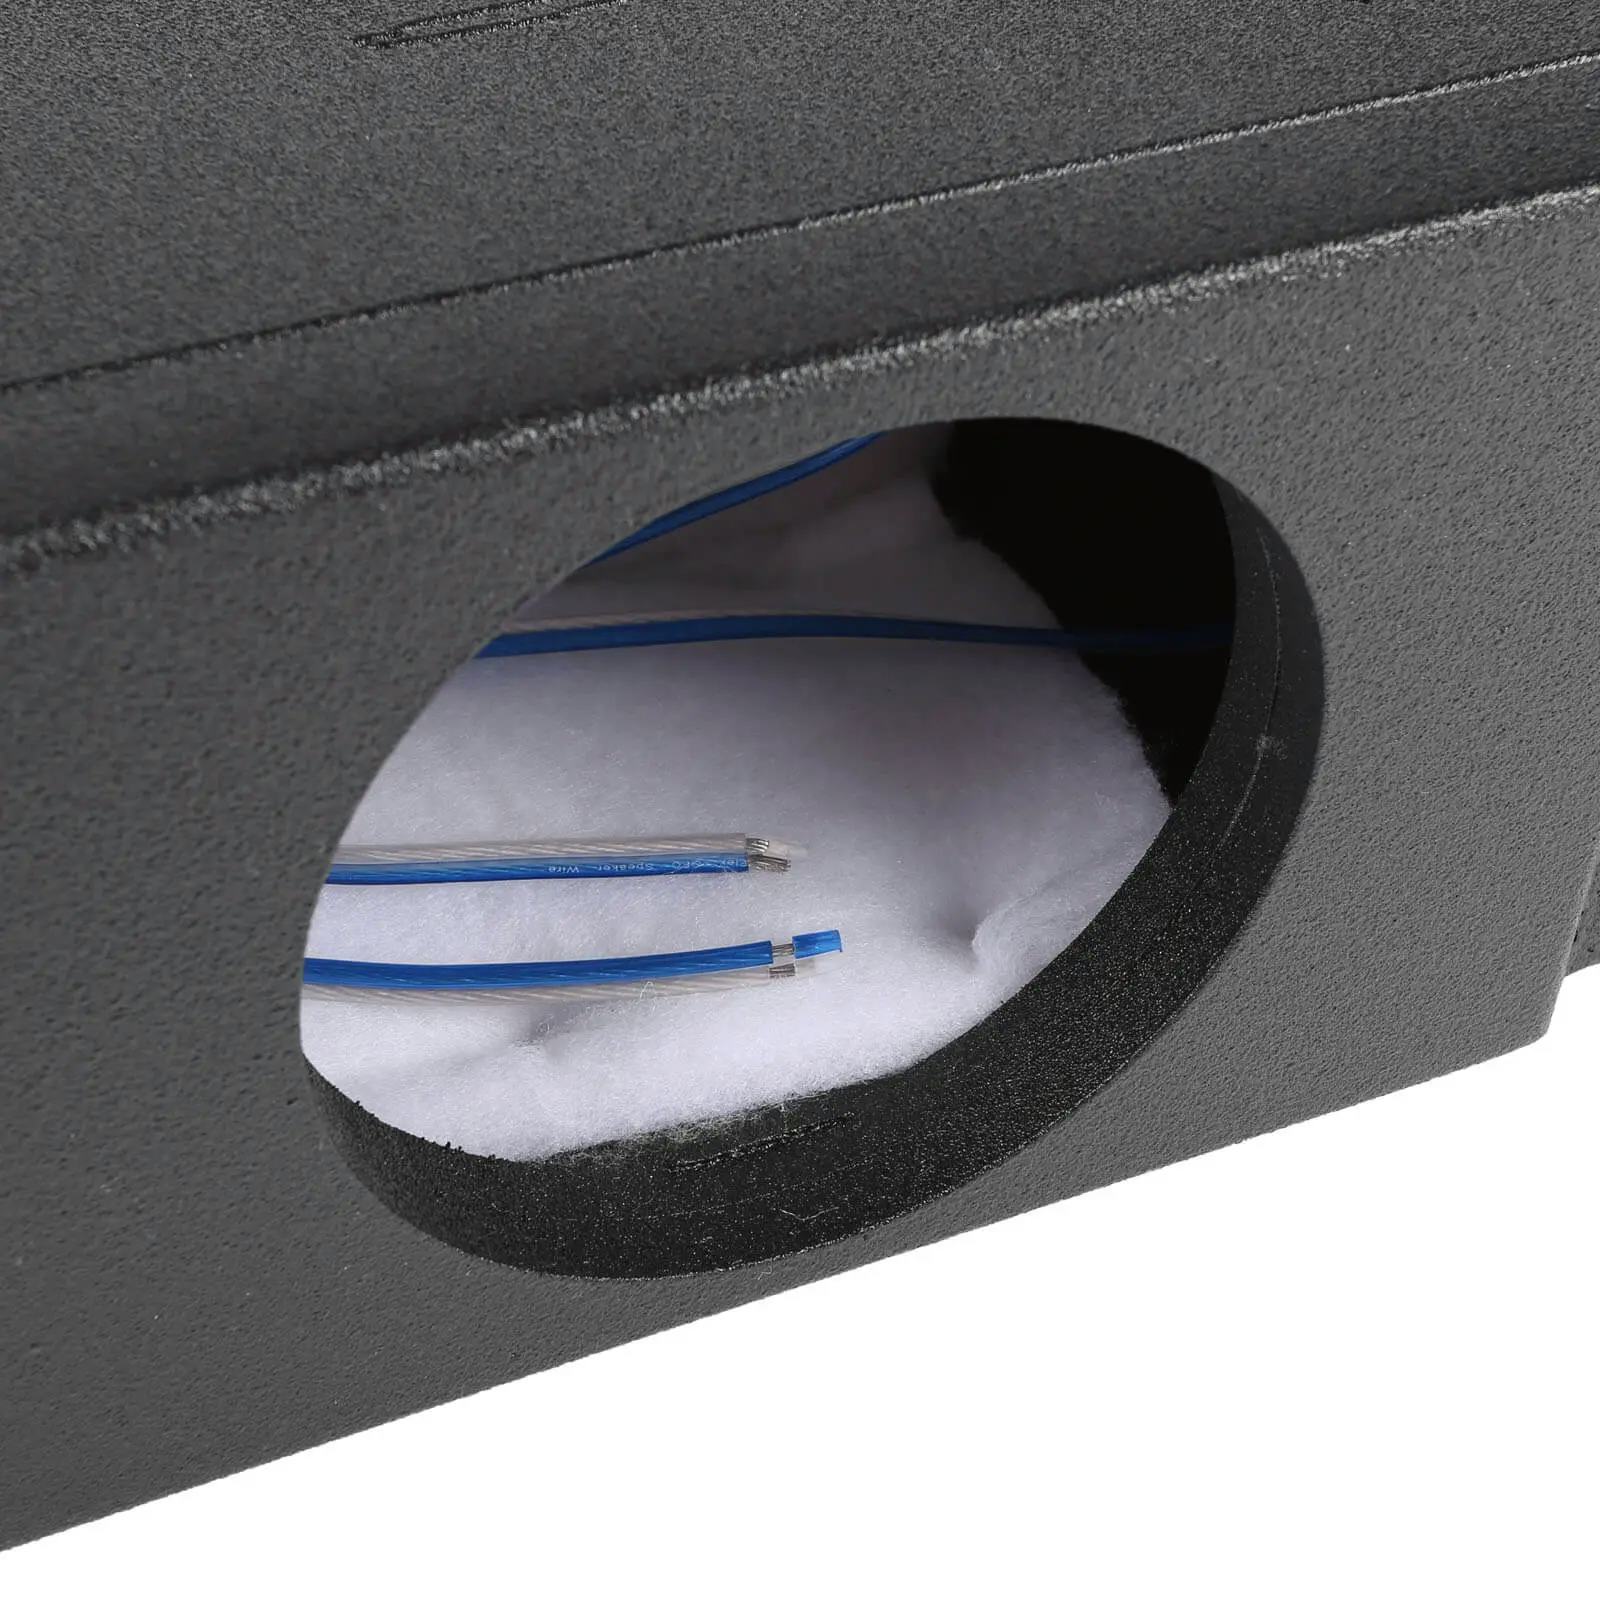 2019-2024 Ram 1500 (5th Gen) Crew Cab Compatible Dual 8" Ported Armor Coated Subwoofer Enclosure #8